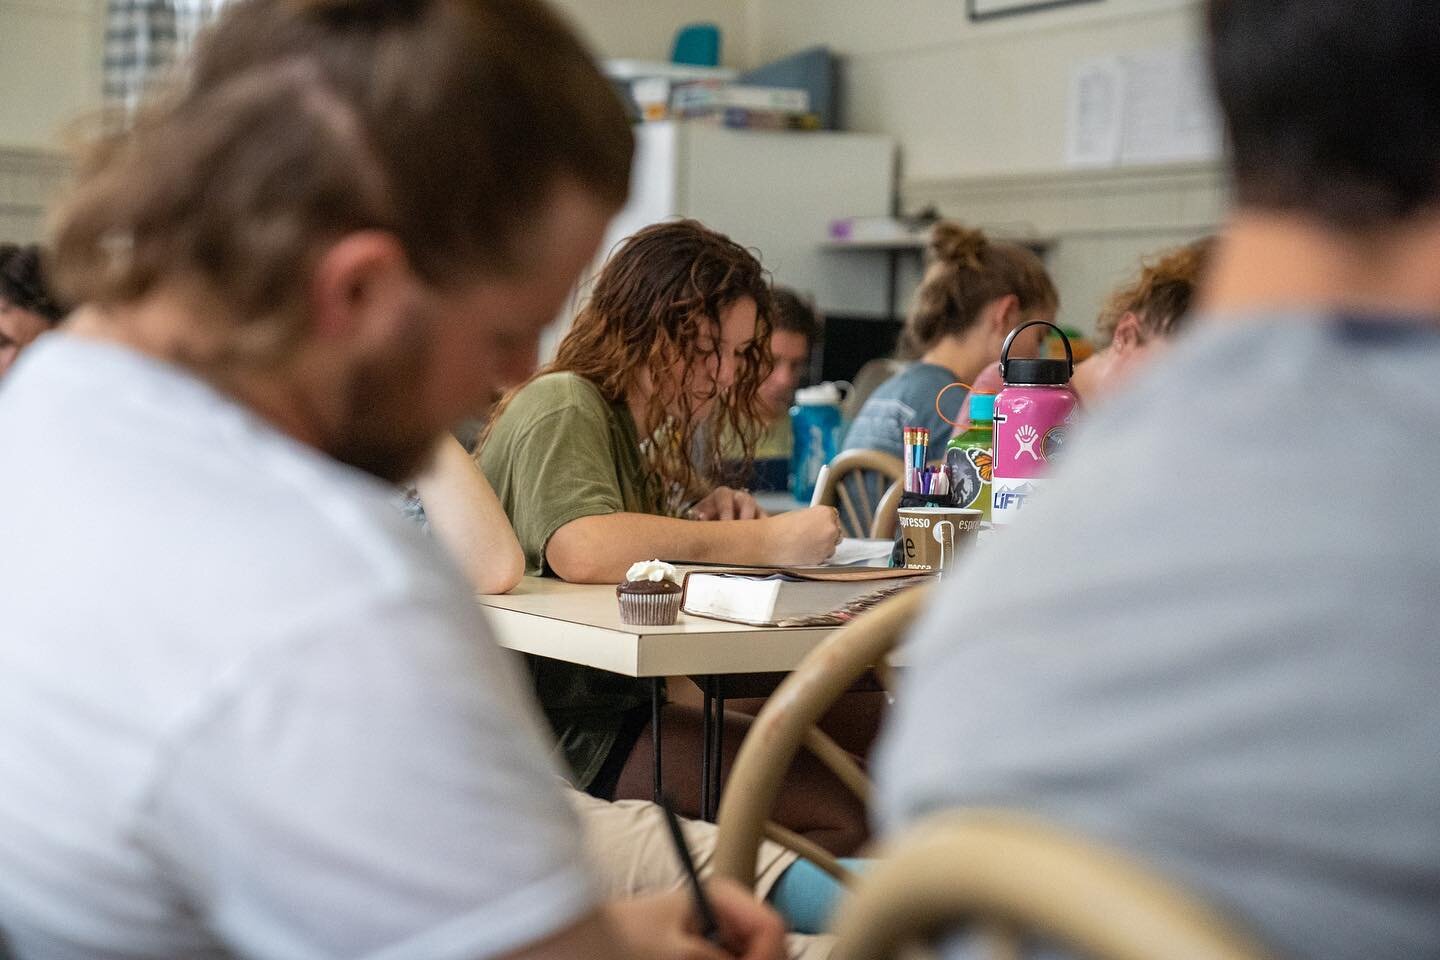 LIFT students are finishing up their college-level theology classes this week with professor @alvin_padilla_velazquez from @gordonconwell 

LIFT students have been taught all semester by @joeblazechick, @breenders, @trezisetim as well as Kate Tresize